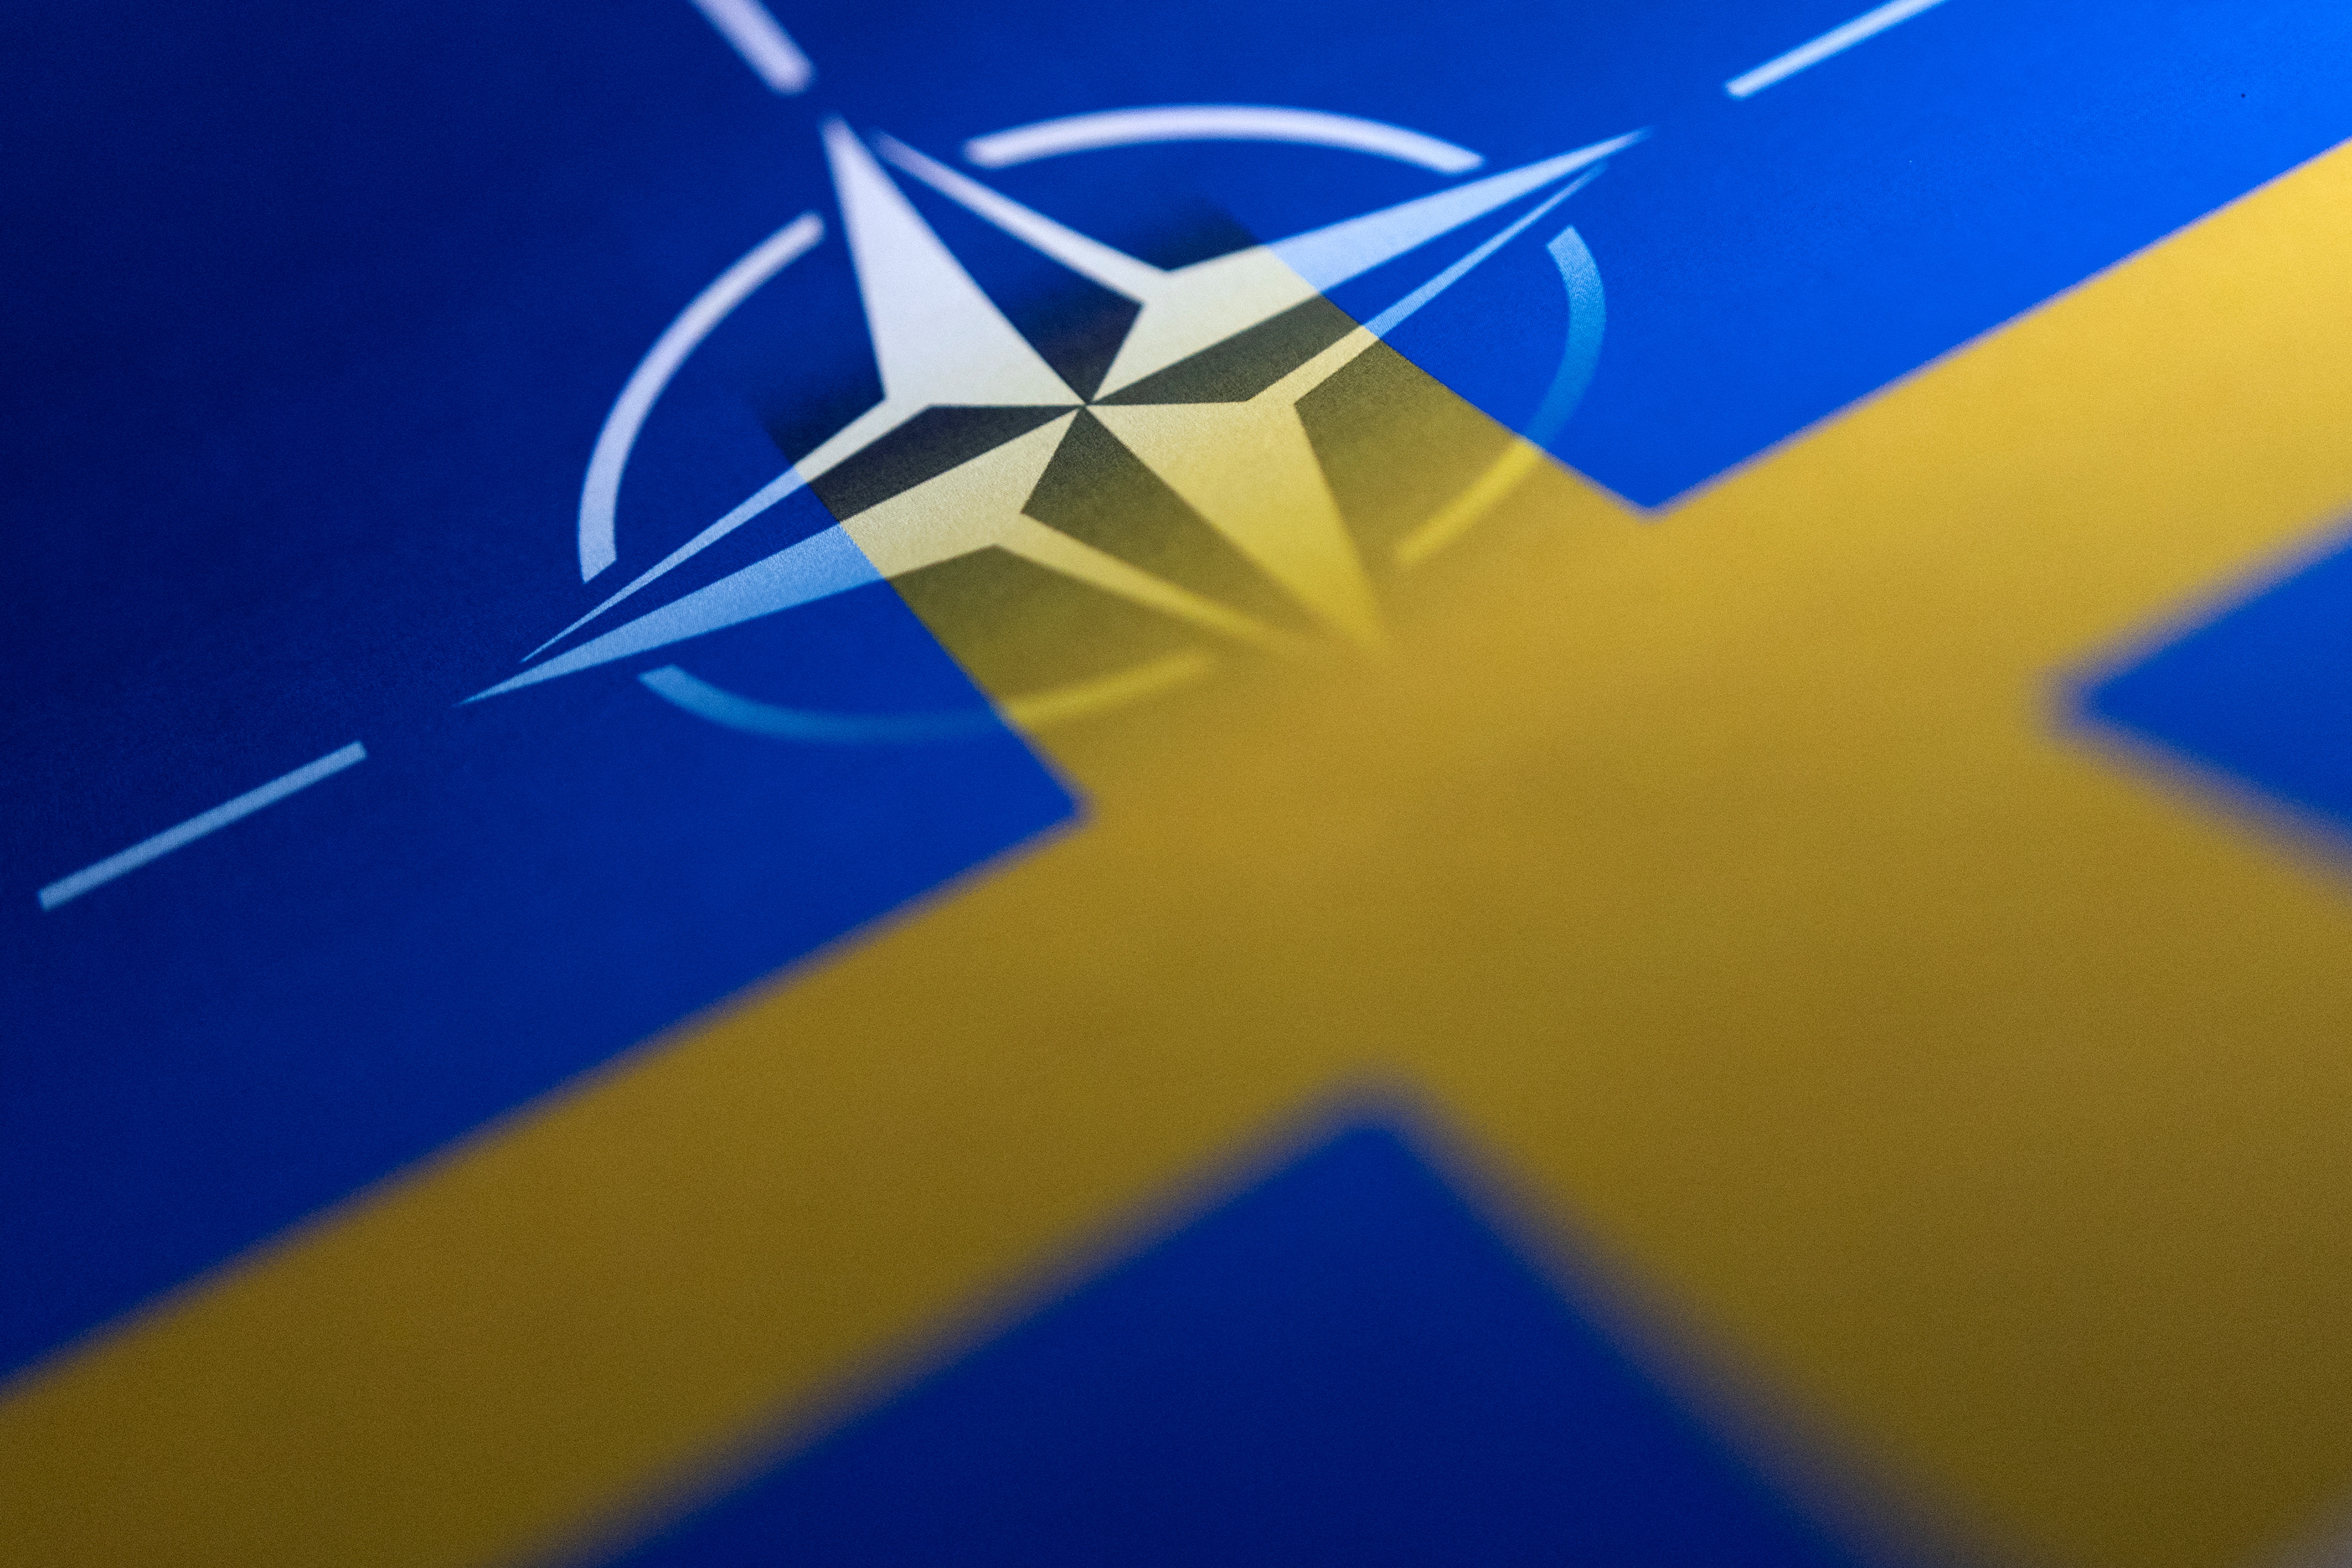 Illustration shows Swedish and NATO flags